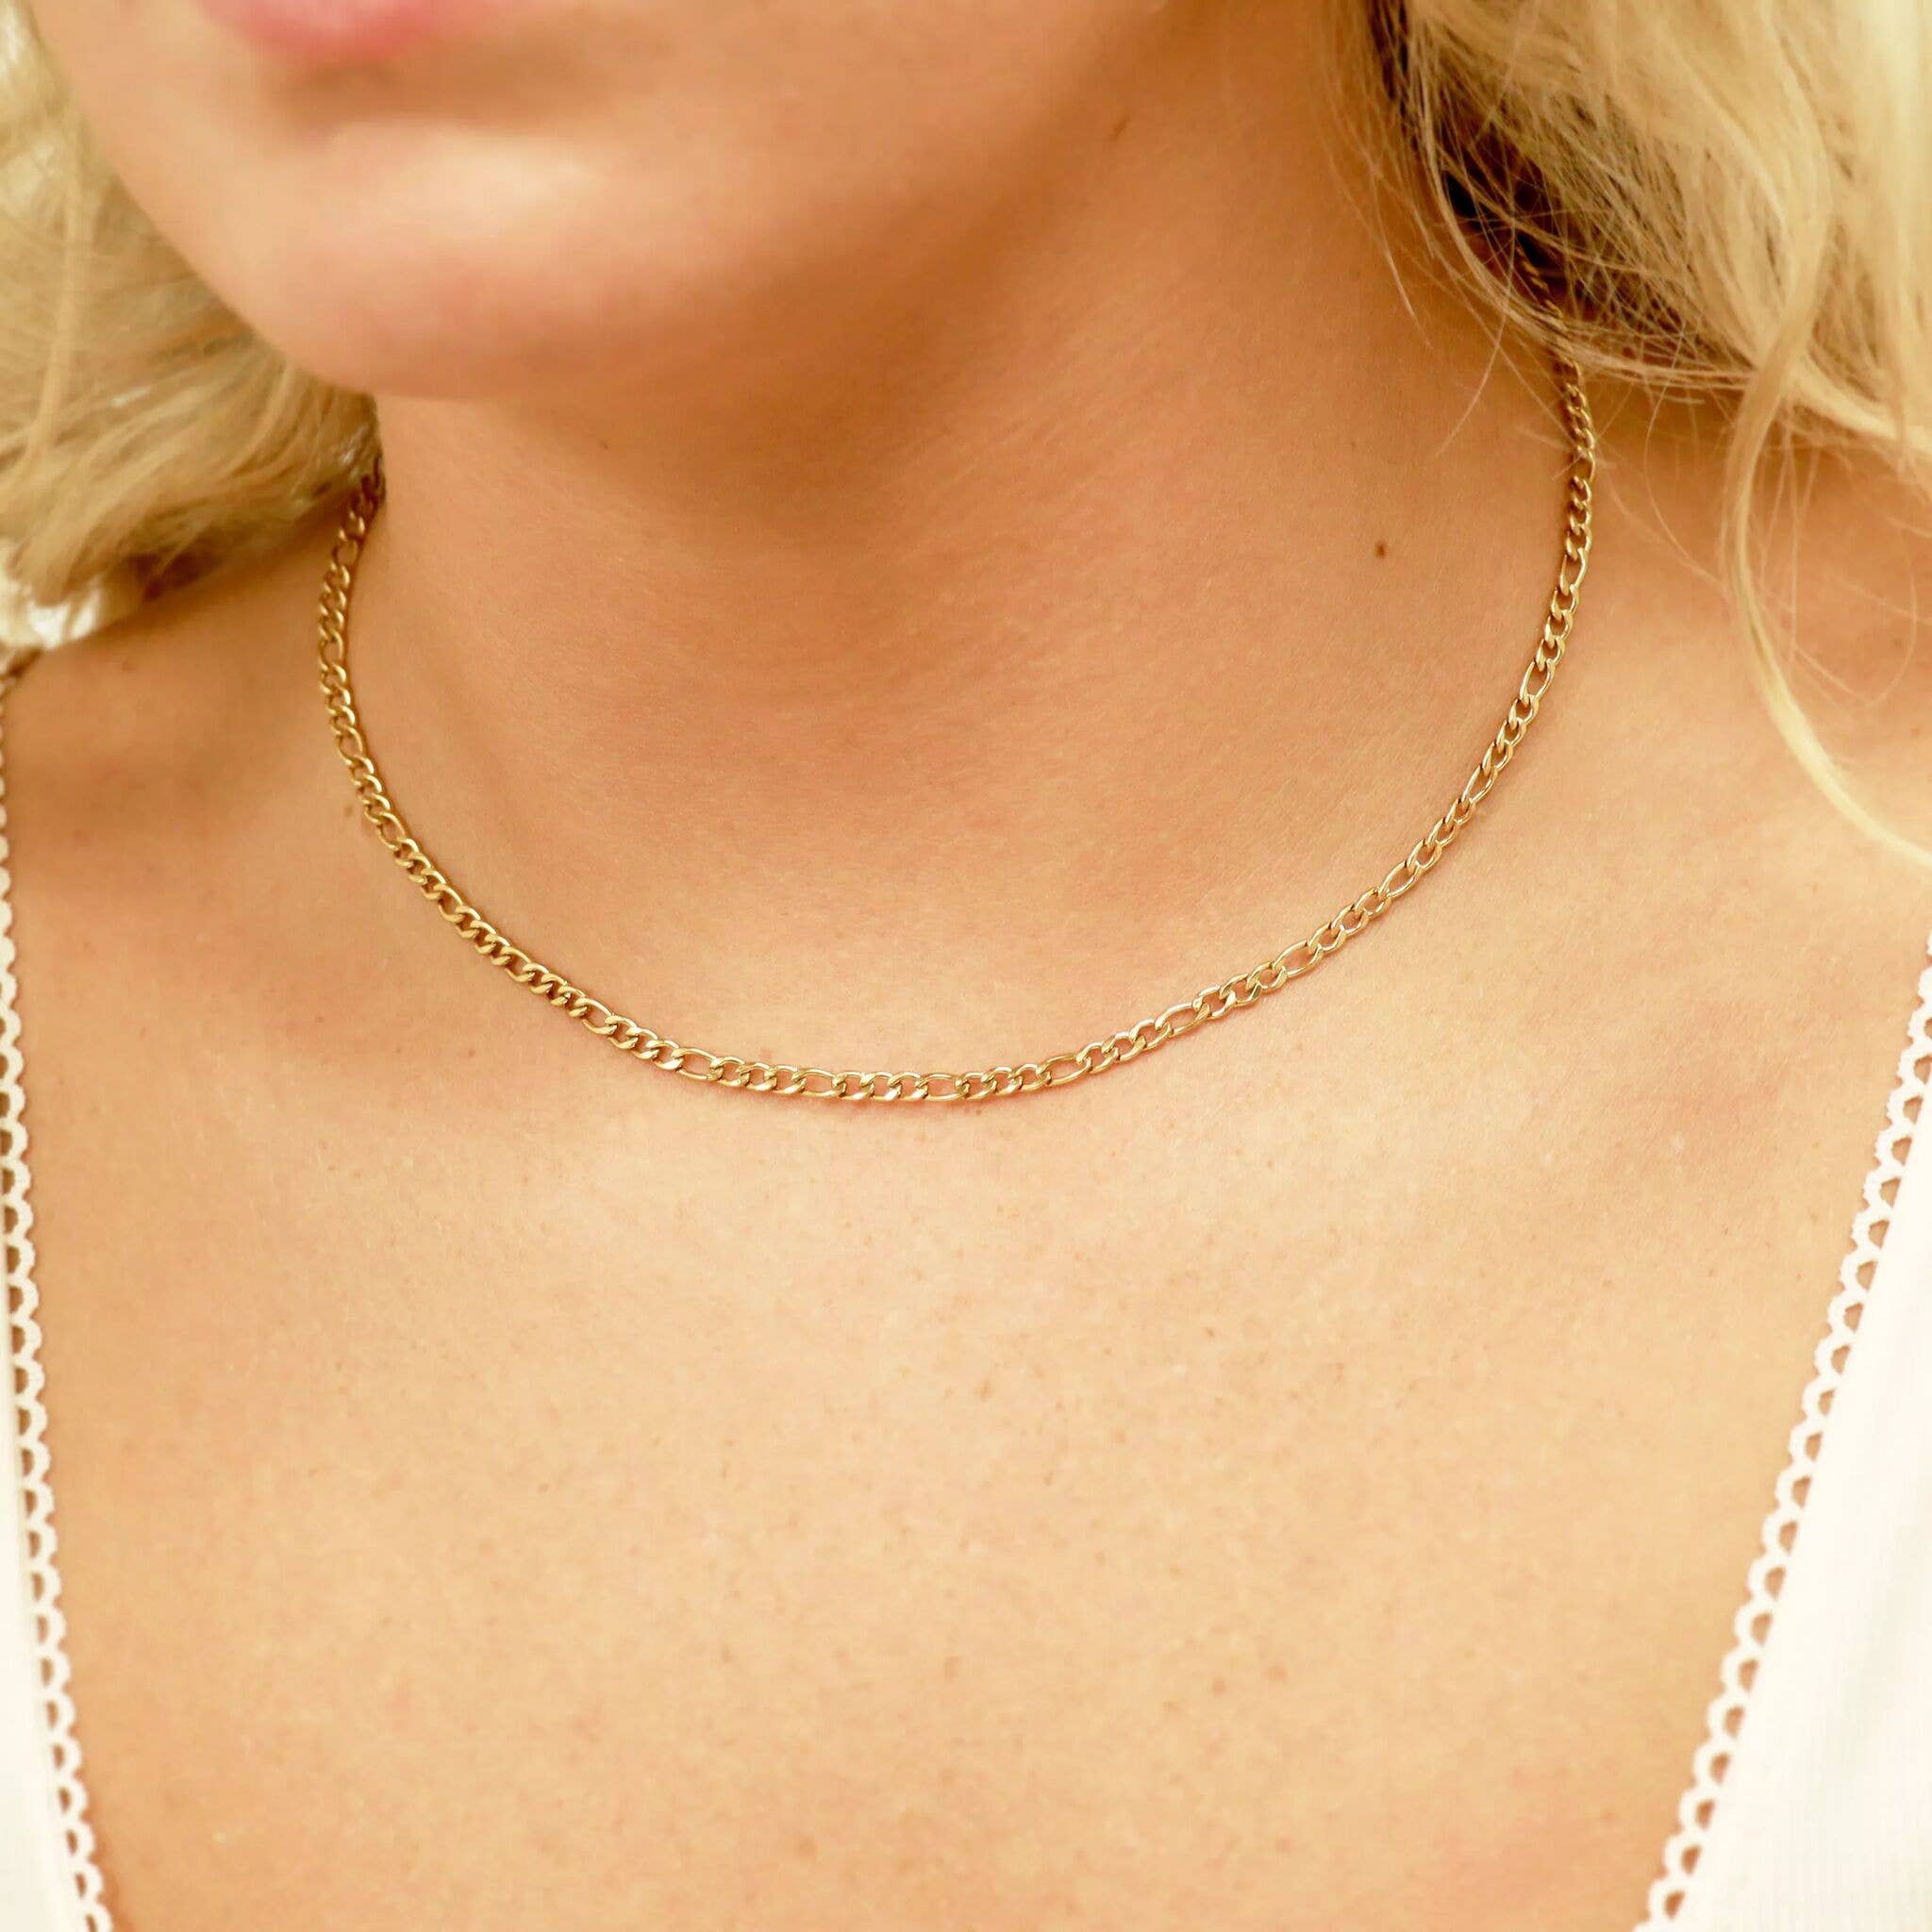 Water Proof 18K Gold Figaro Chain Necklace